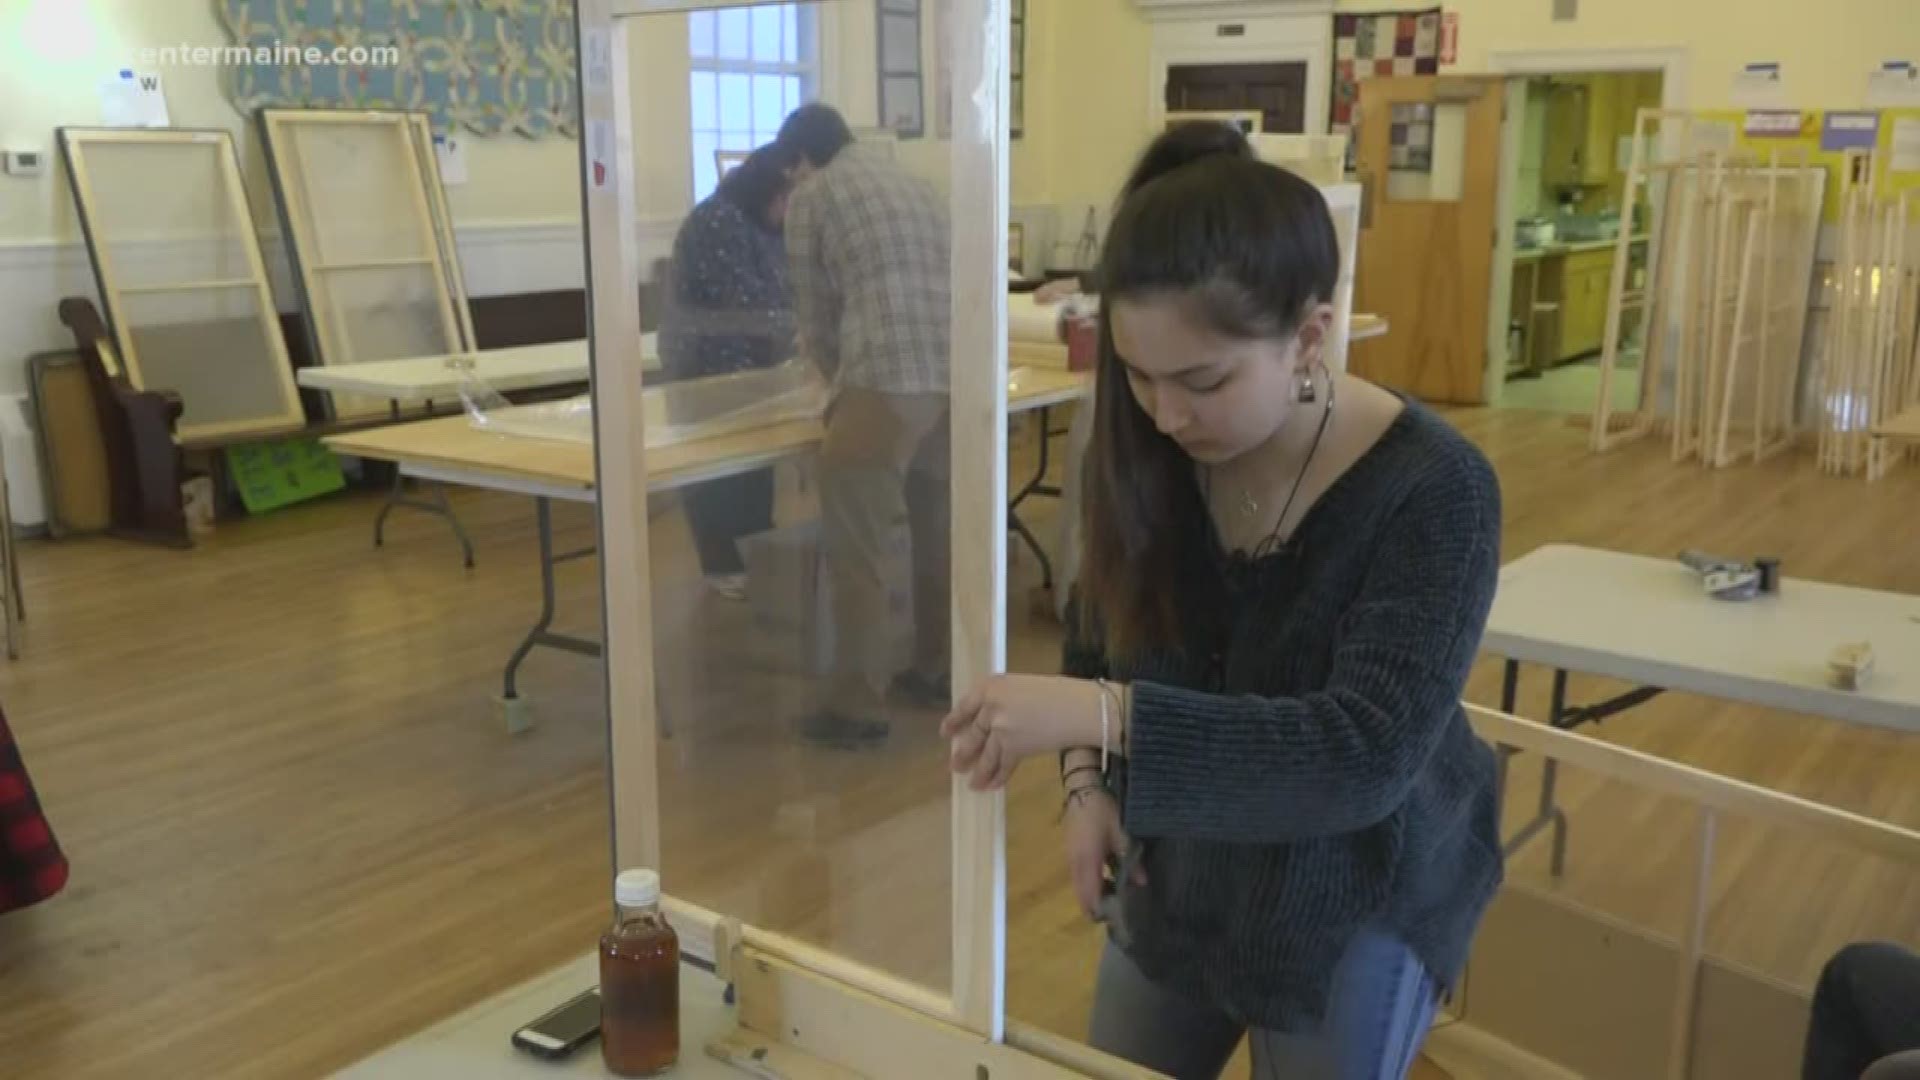 Free and low-cost window inserts keep Mainers warm during the winter season